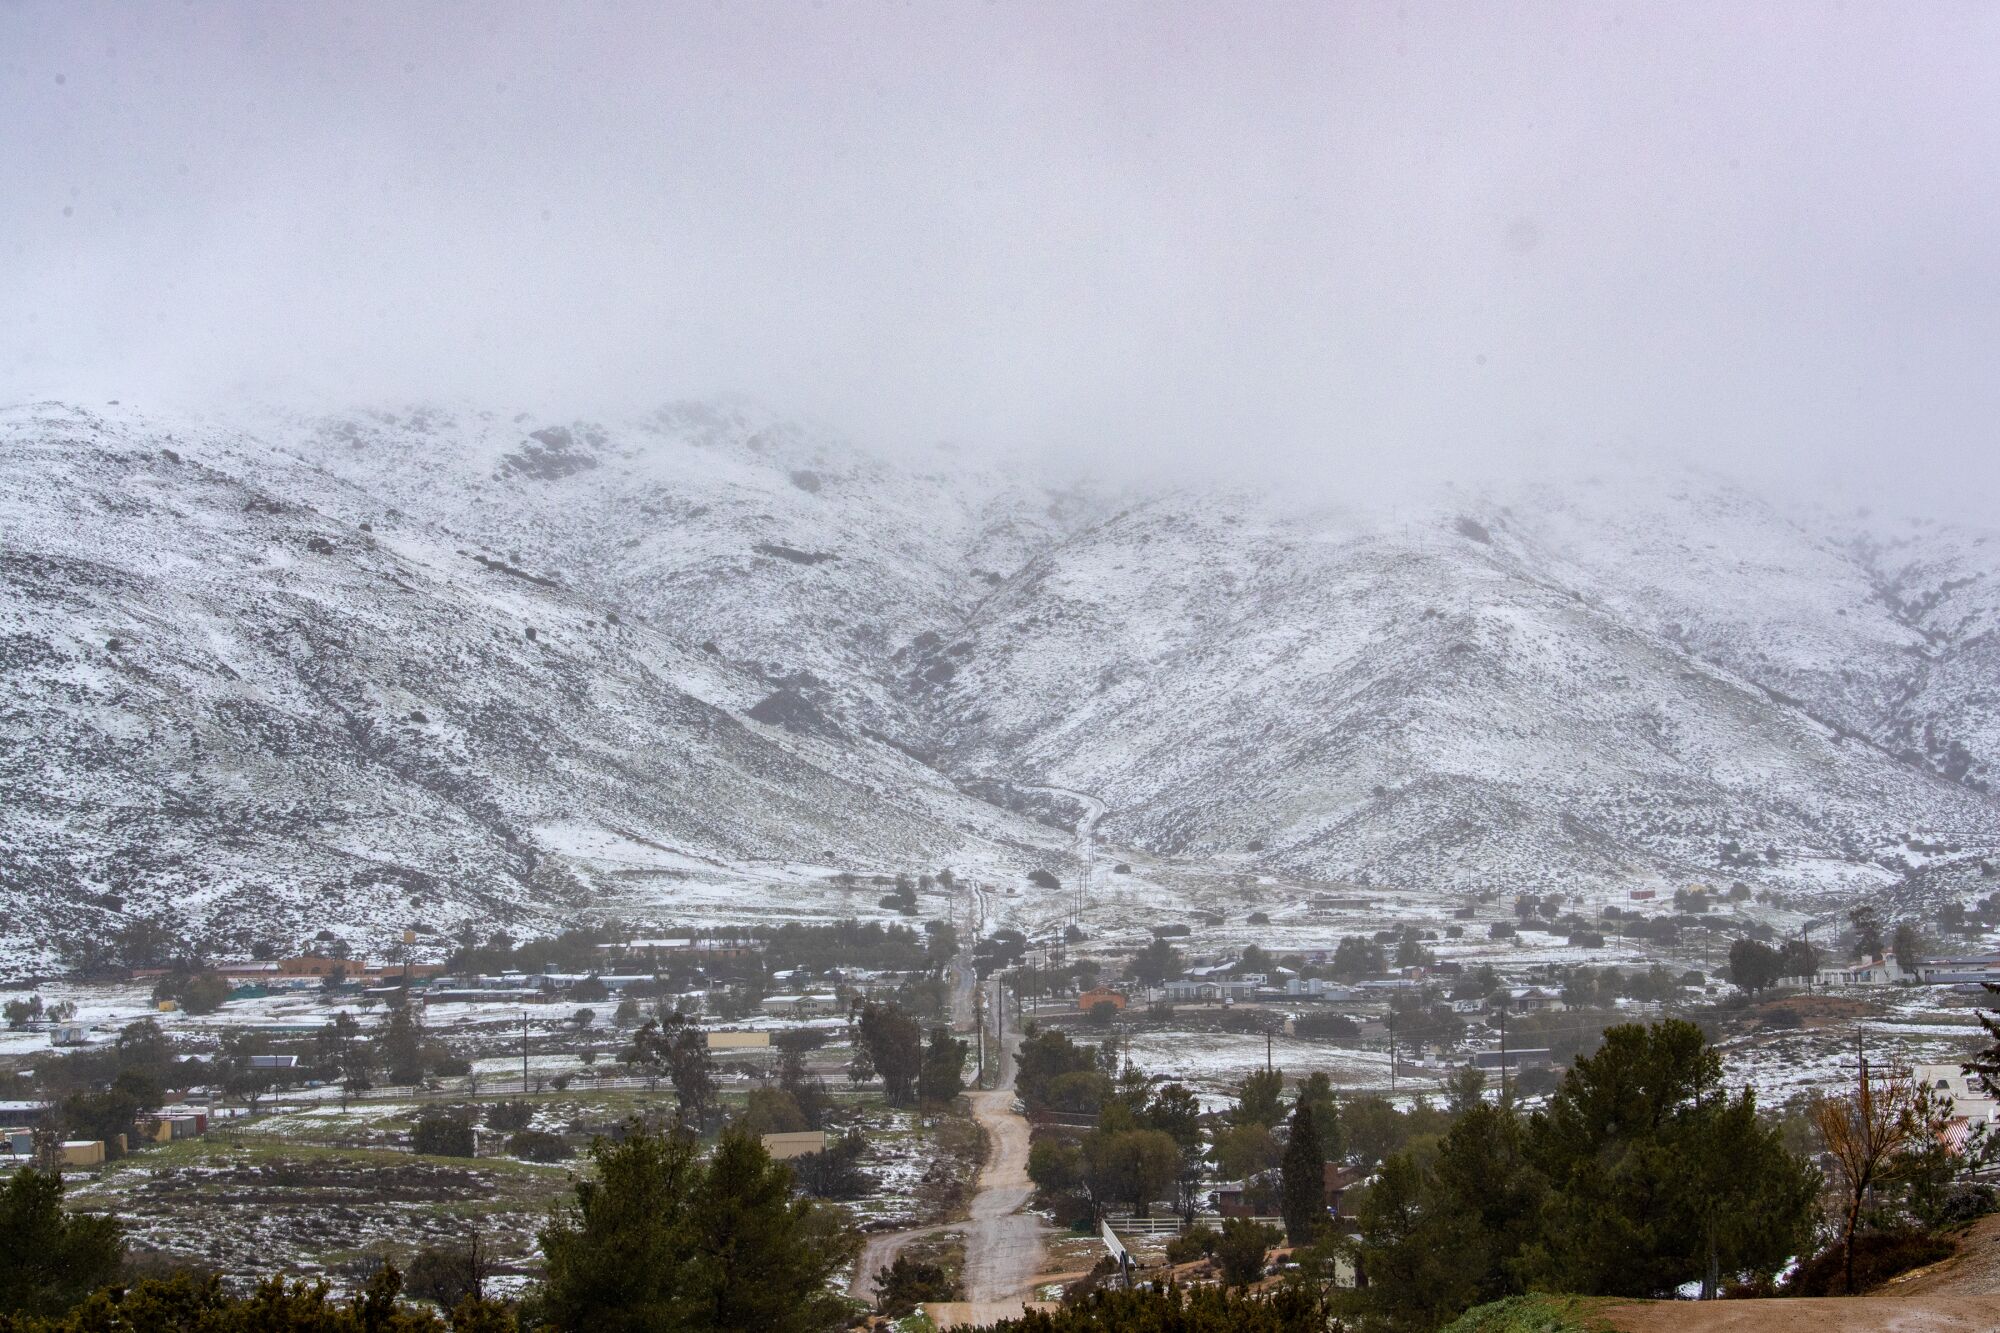 Low clouds cloak the snow-covered mountains above Acton, near the Antelope Valley, on Friday.